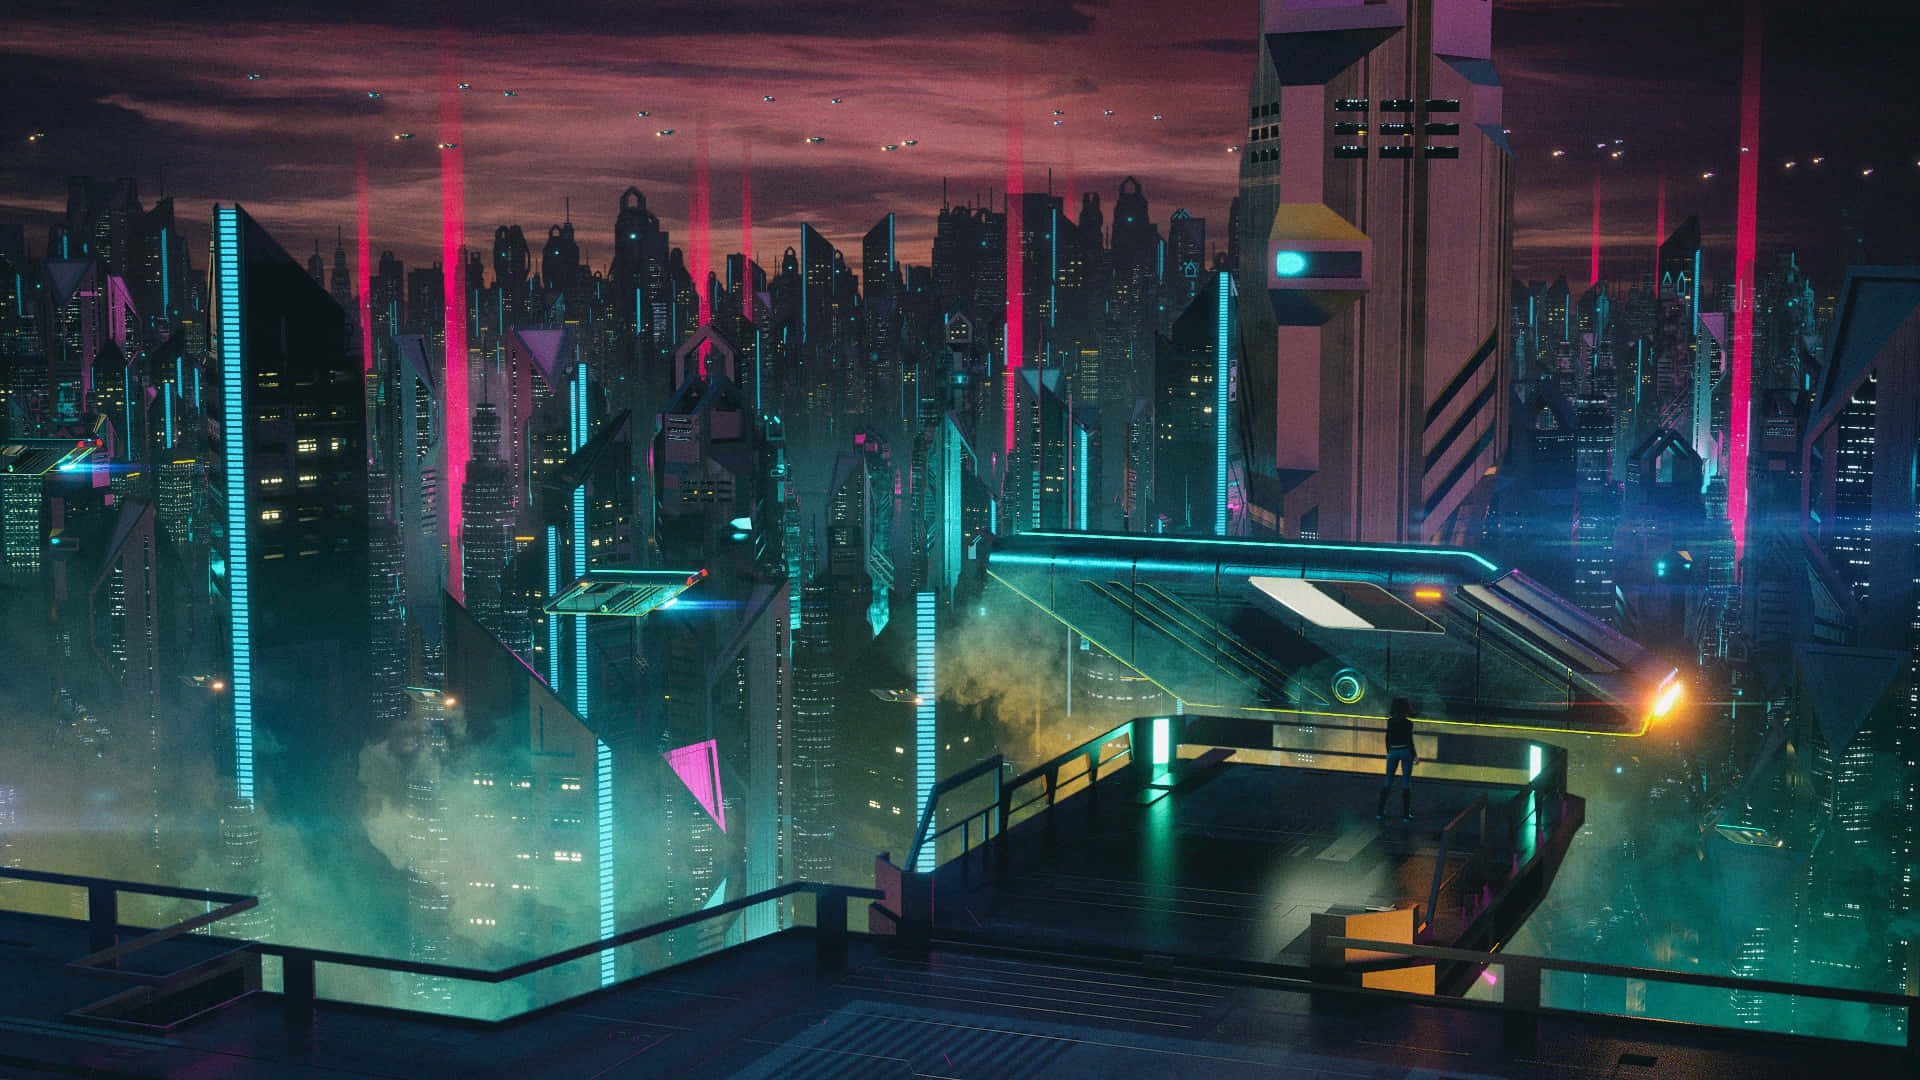 Welcome to Futuristic City, the city of wonders!